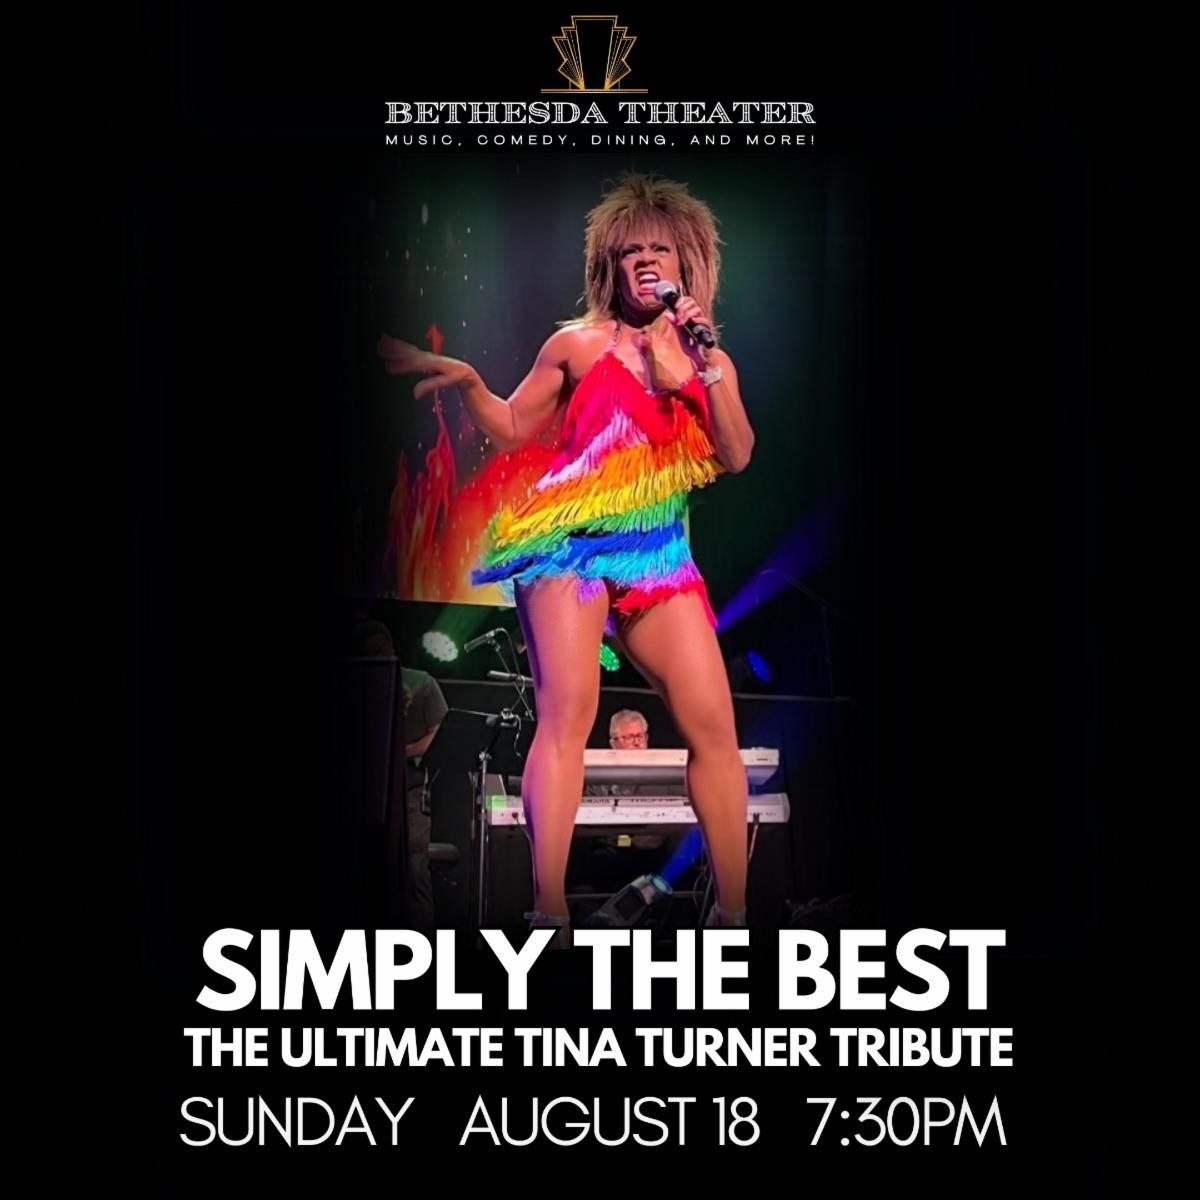 Simply The Best: The Ultimate Tina Turner Tribute